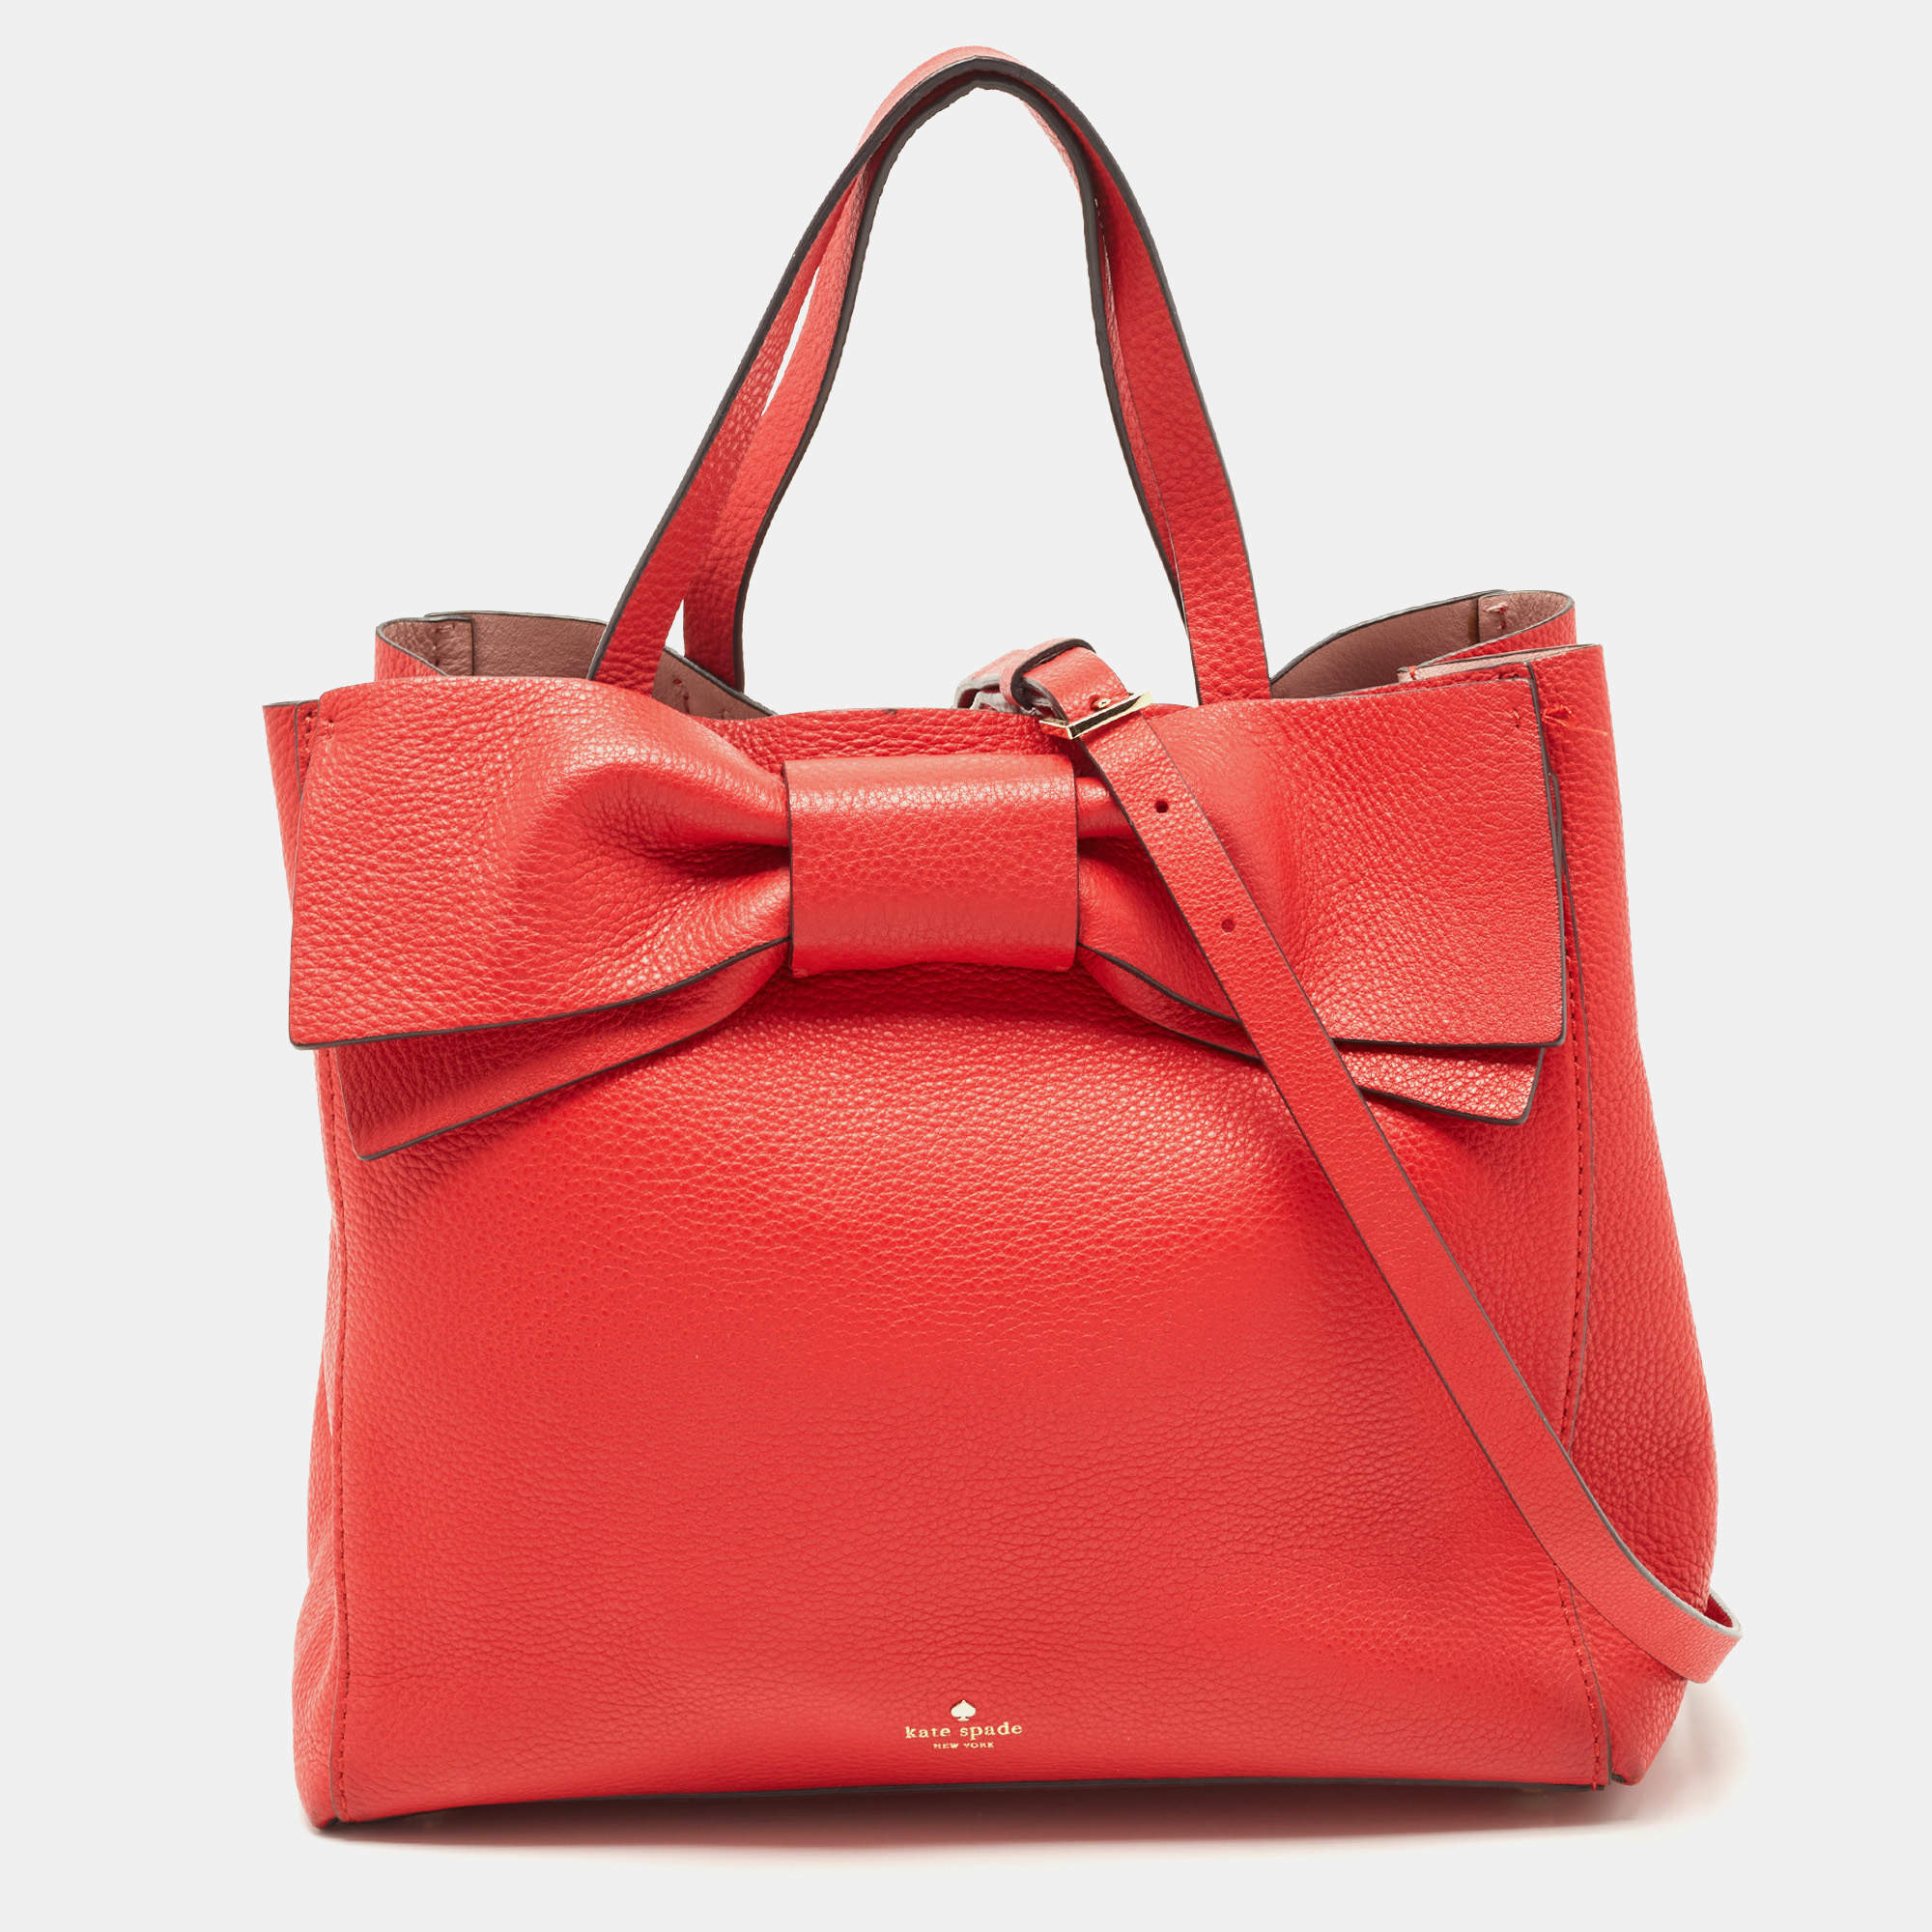 Kate spade NY Cameron medium satchel rosso red bag | Red bags, Bags, Kate  spade ny